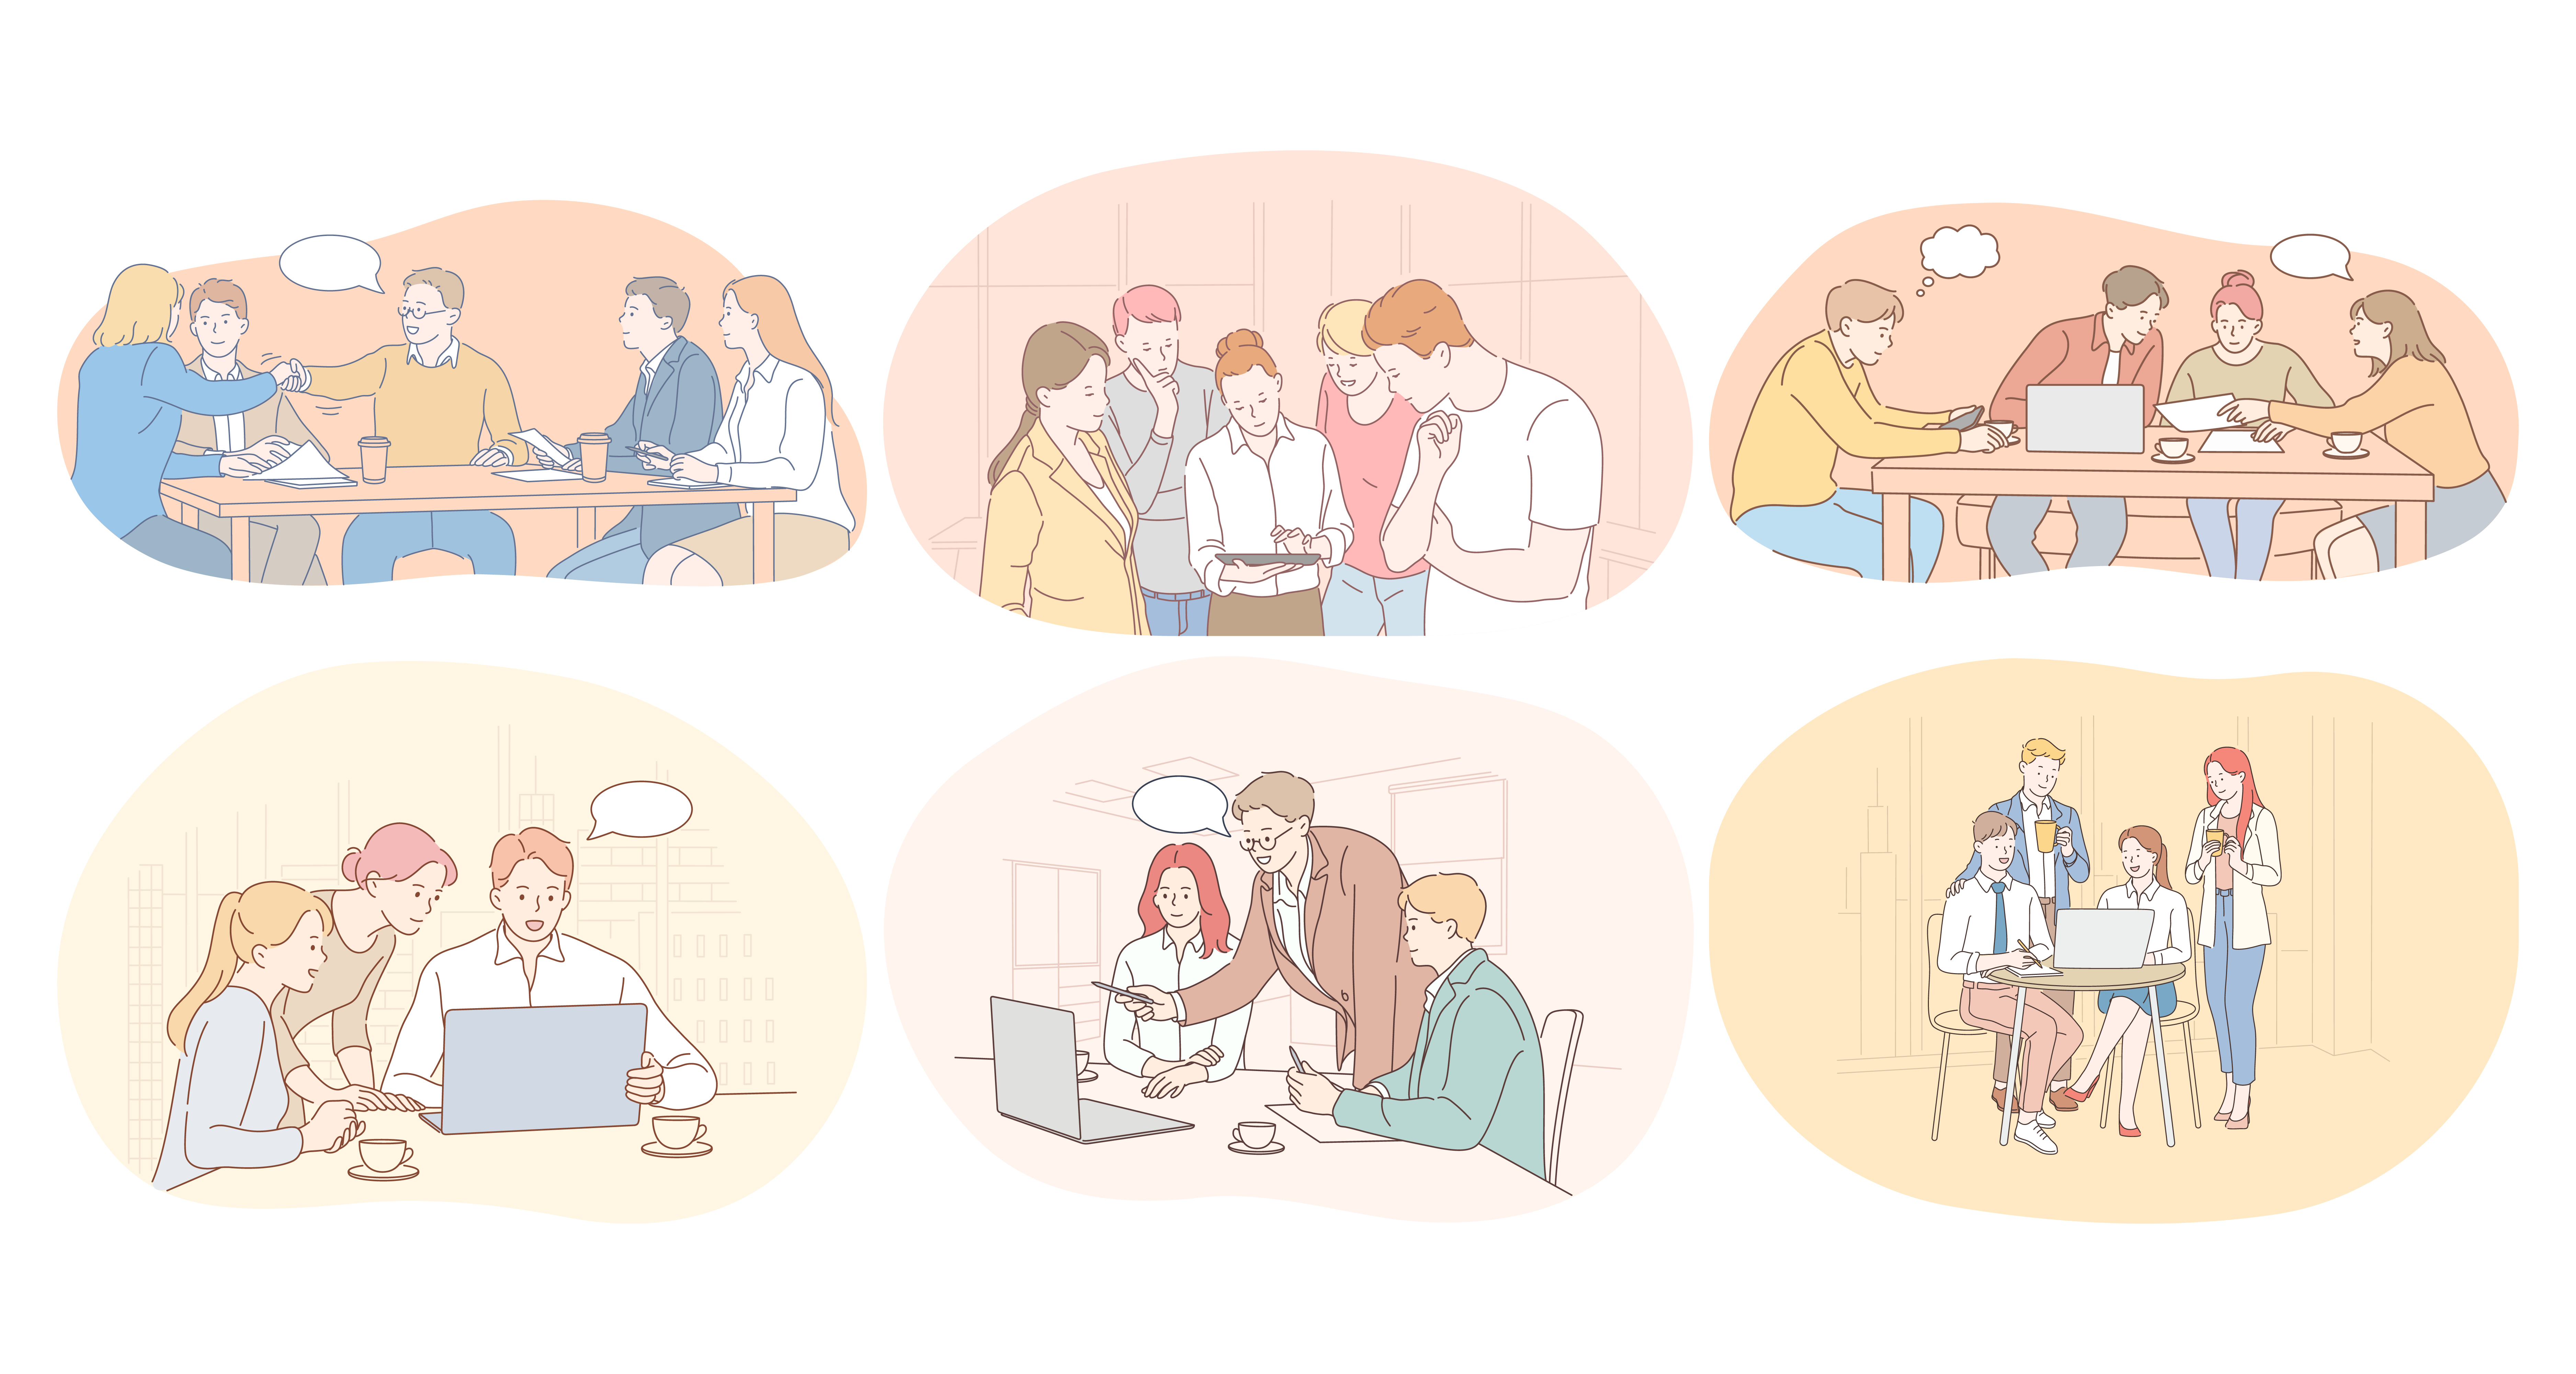 Teamwork, brainstorming, office, negotiations, working, cooperation, collaboration concept. Business people office workers discussing projects startup together during brainstorming, sharing opinions. Teamwork, brainstorming, office, negotiations, working, cooperation, collaboration concept